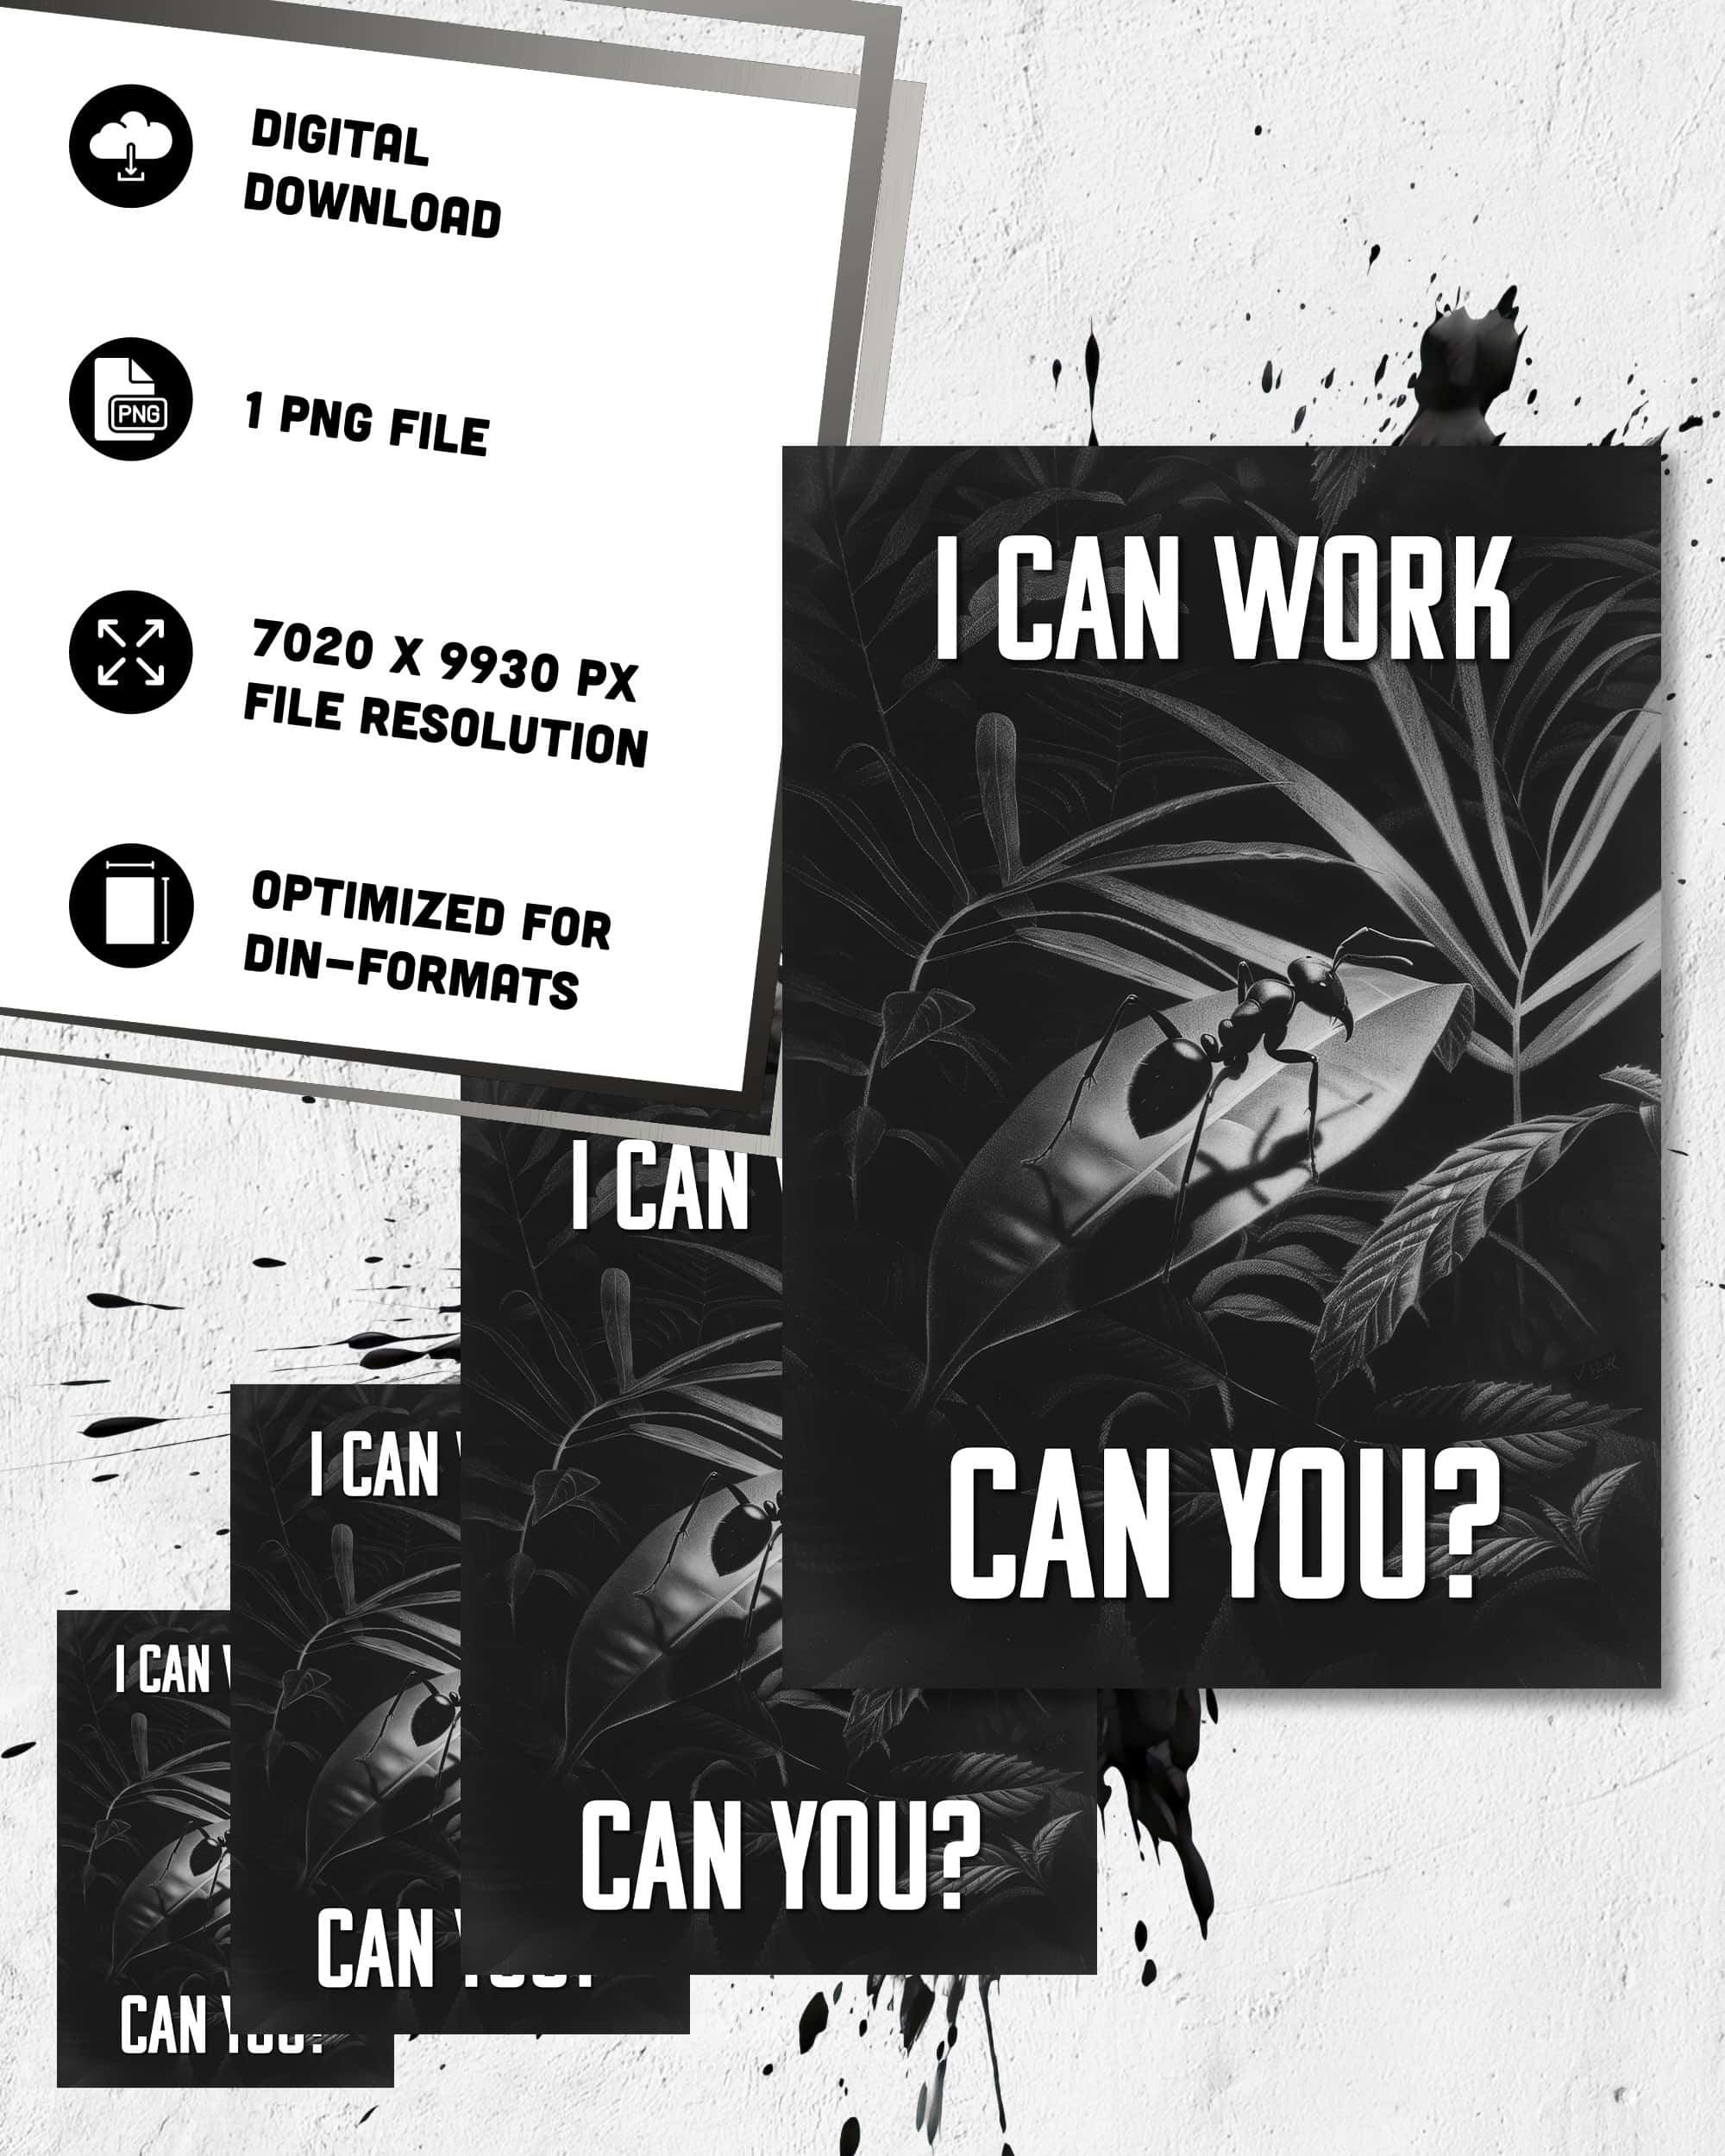 I can work | Digital Poster